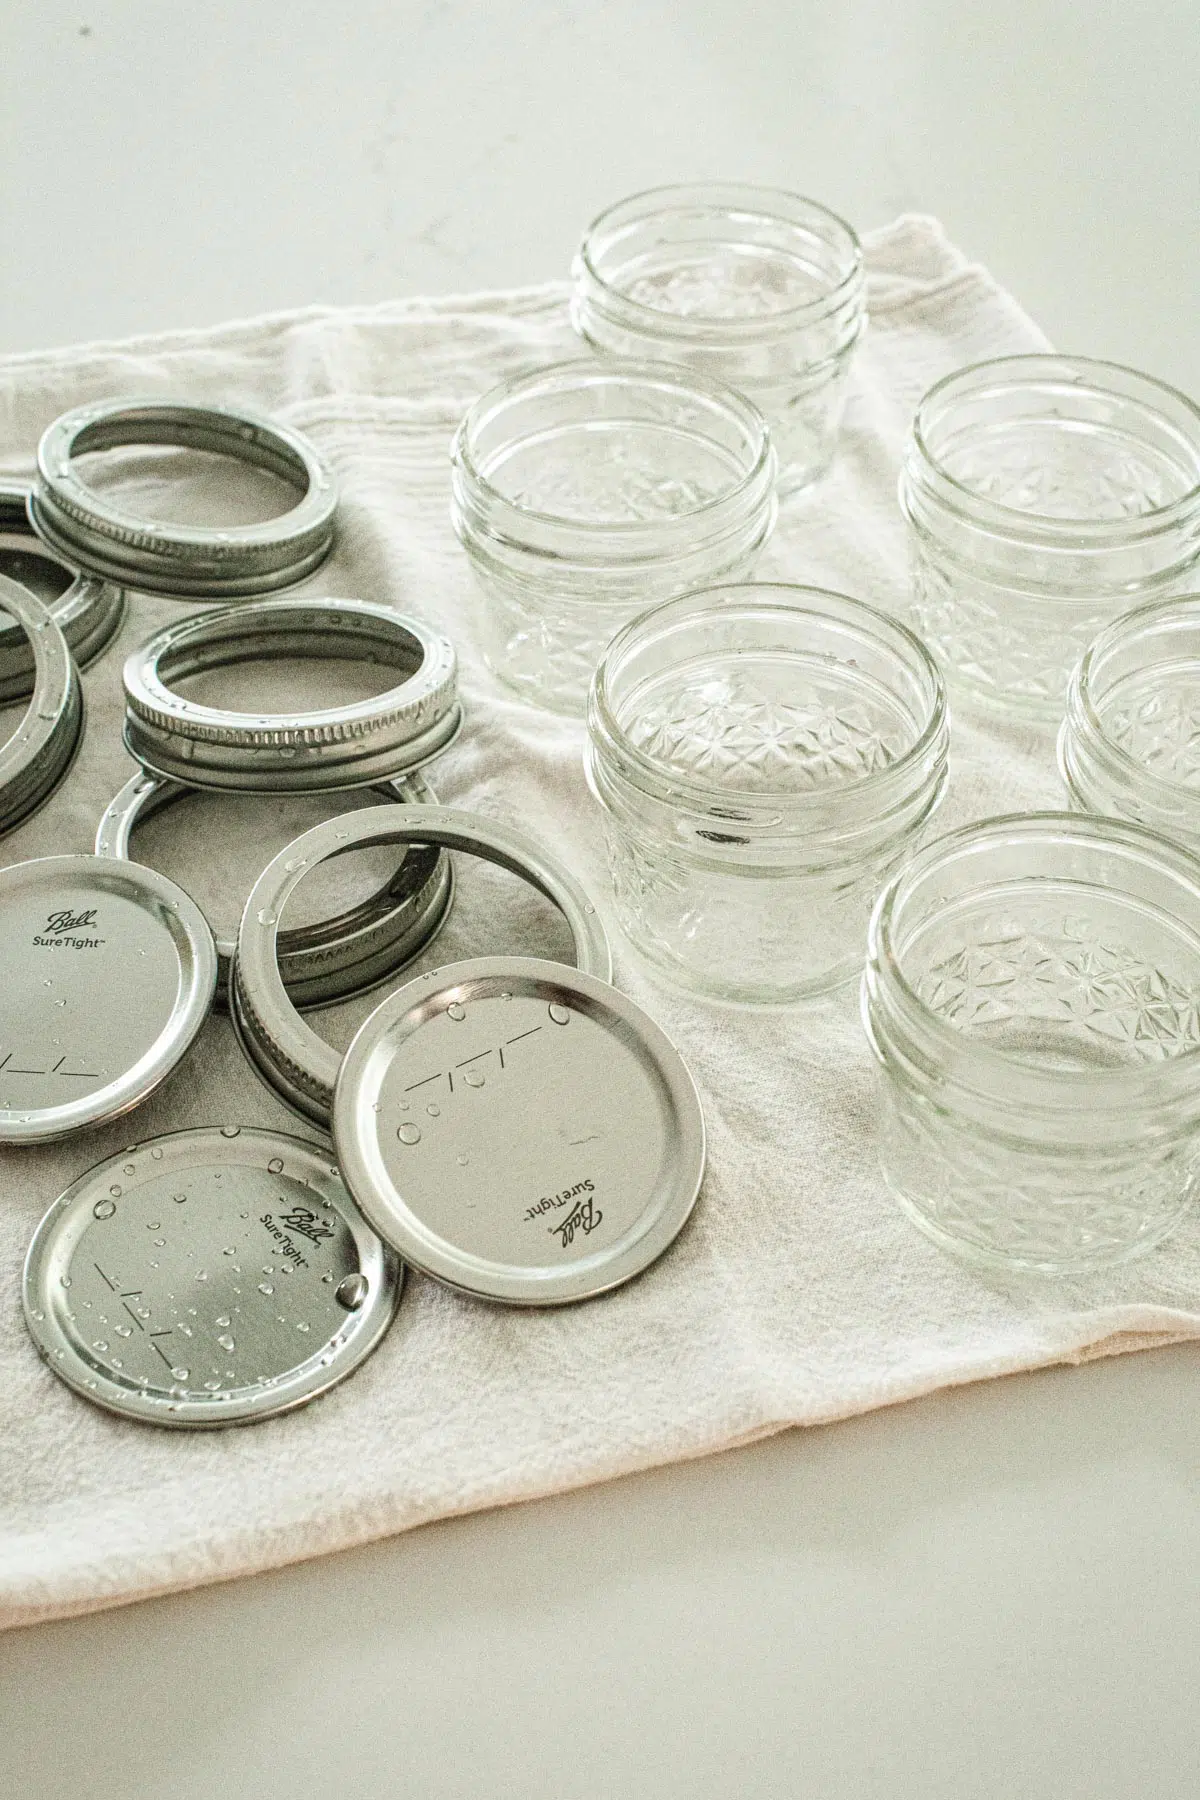 Canning jars, lids, and rings drying on a white towel.